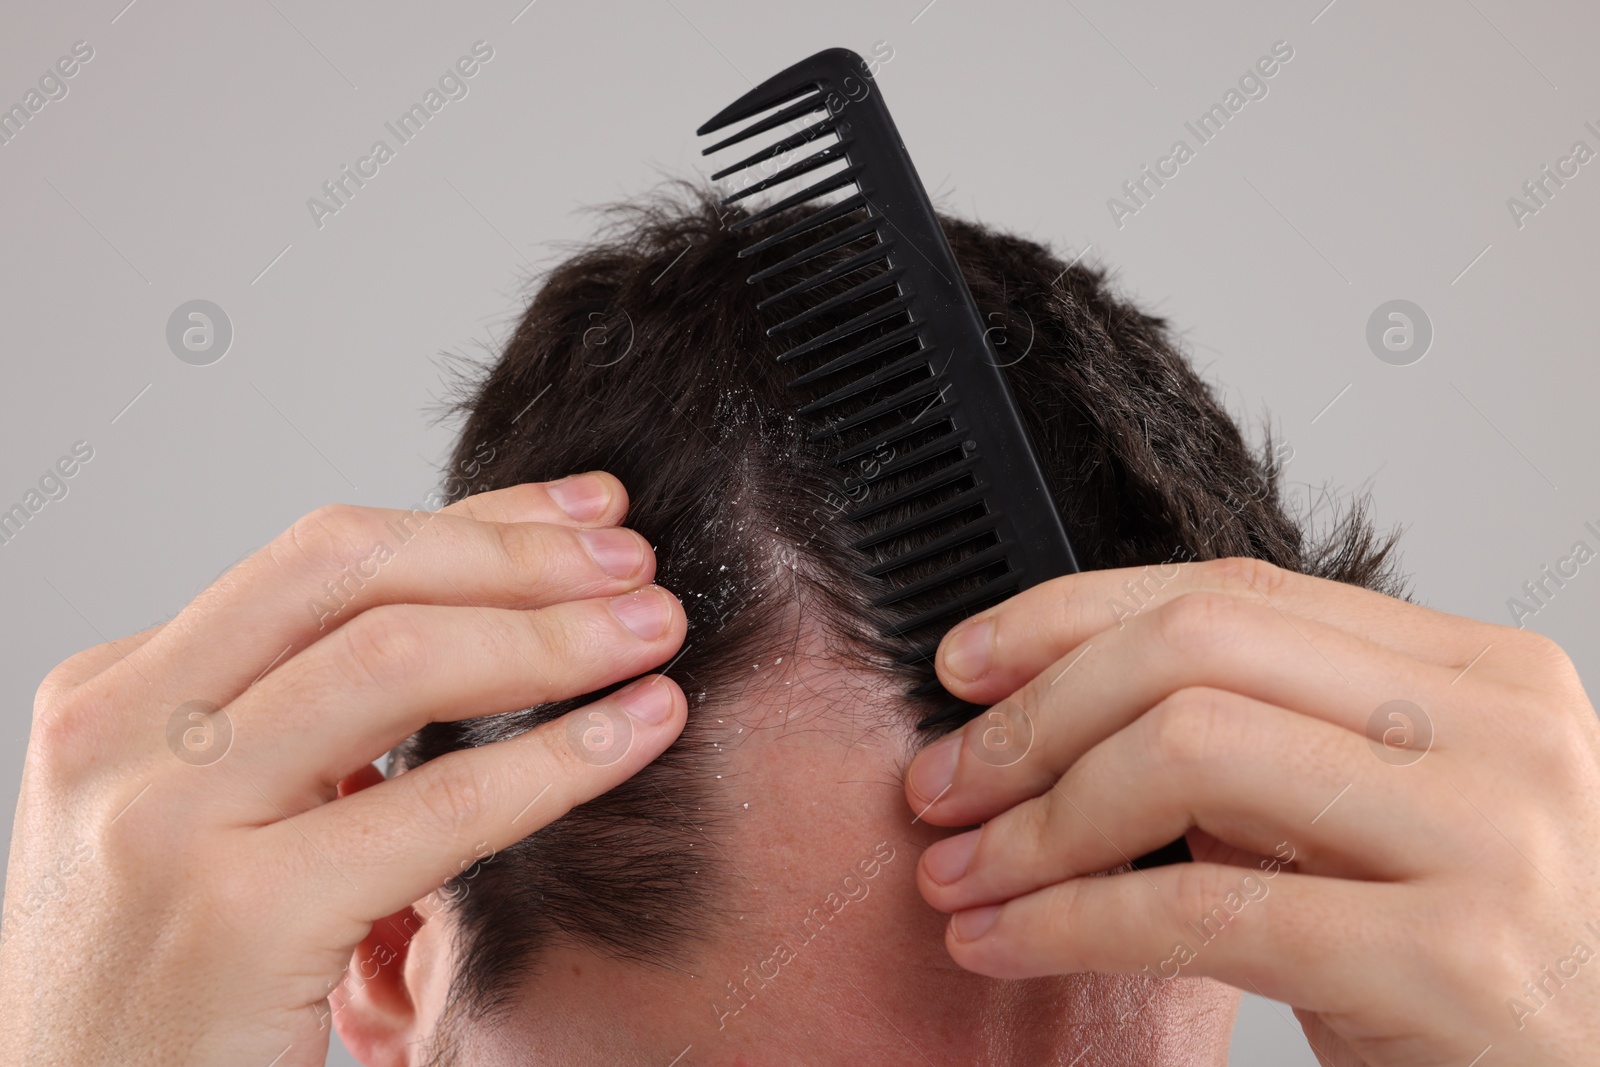 Photo of Dandruff problem. Man with comb examining his hair and scalp on light gray background, closeup